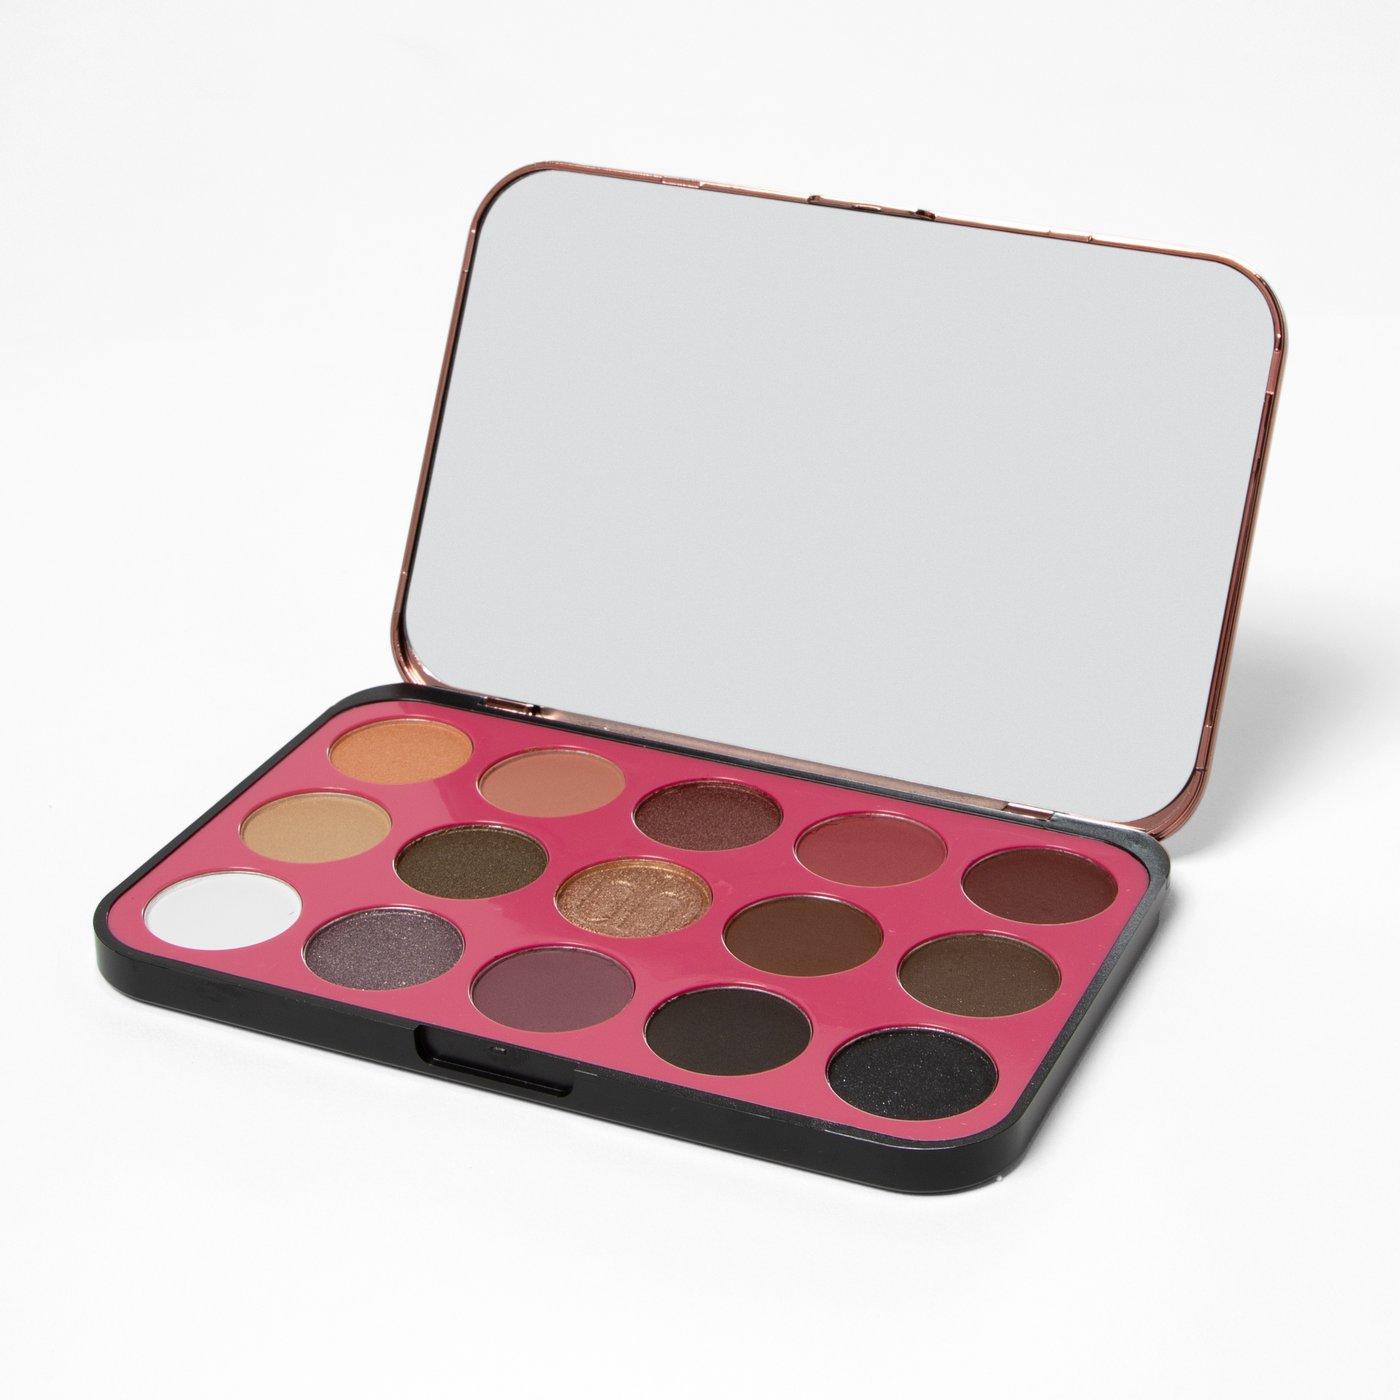 BH Cosmetics Glam Reflection 15-Color Eyeshadow Palette L'Amour